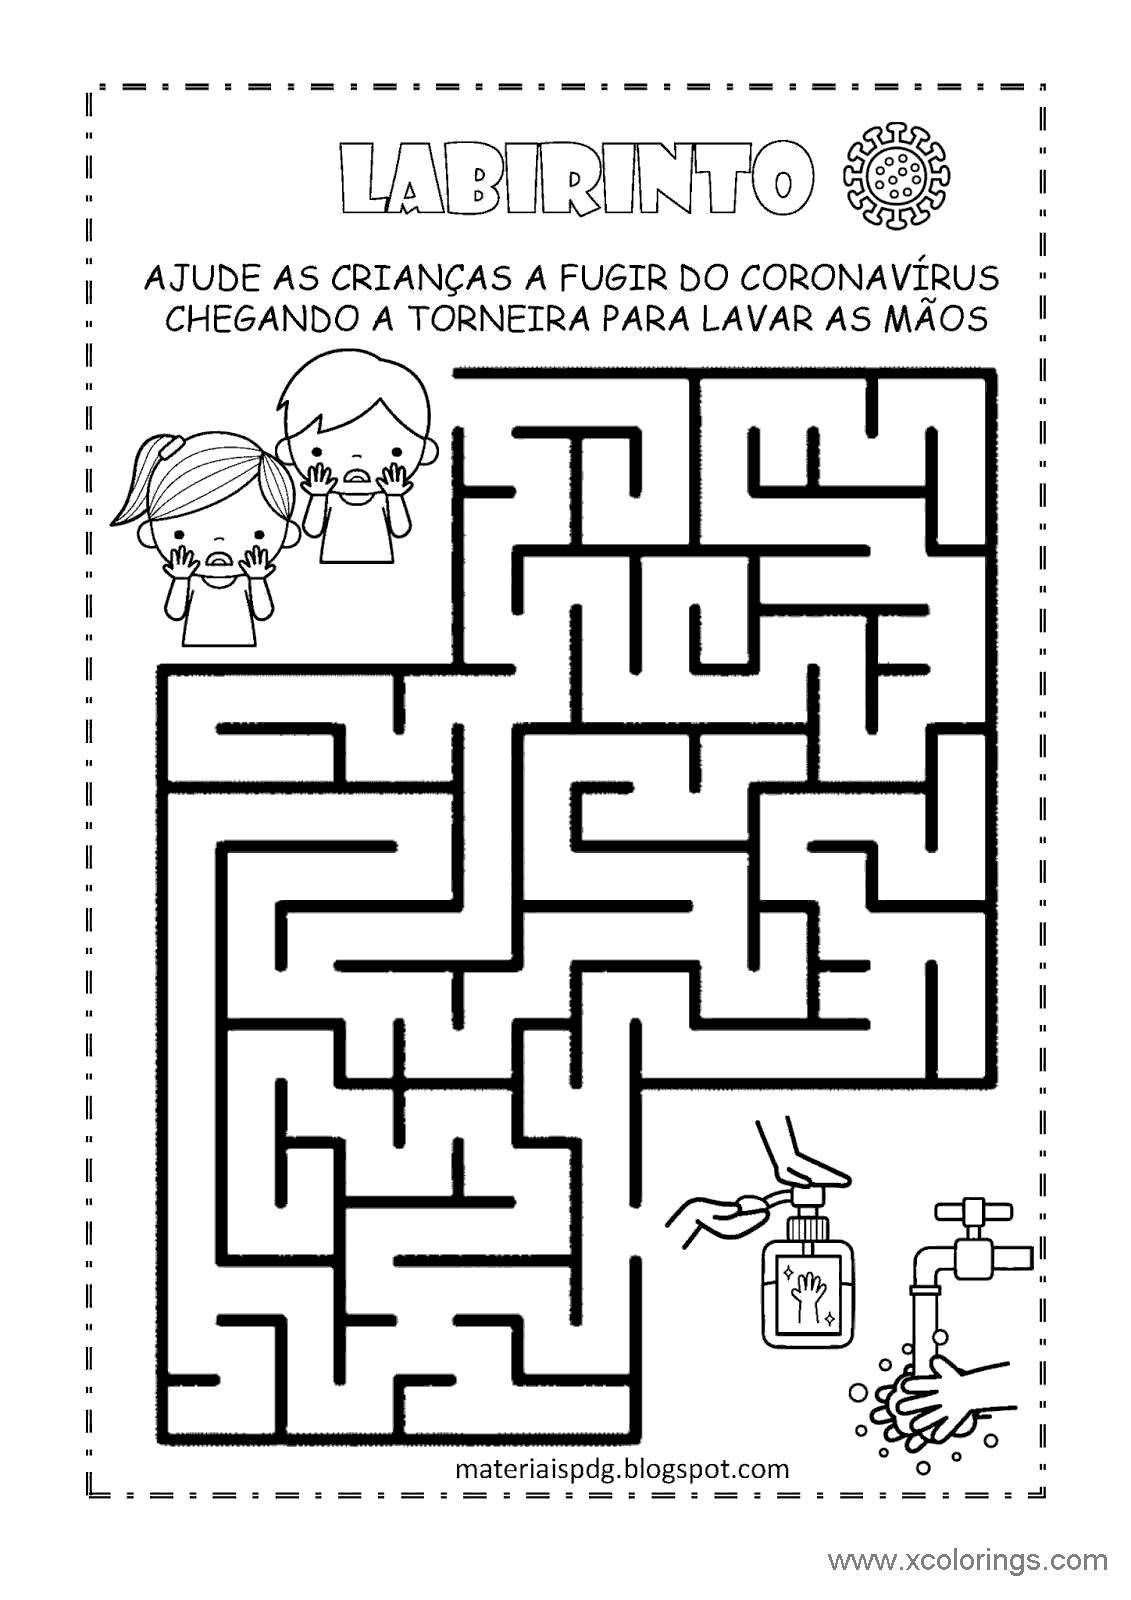 Free Covid-19 Maze Coloring Pages printable